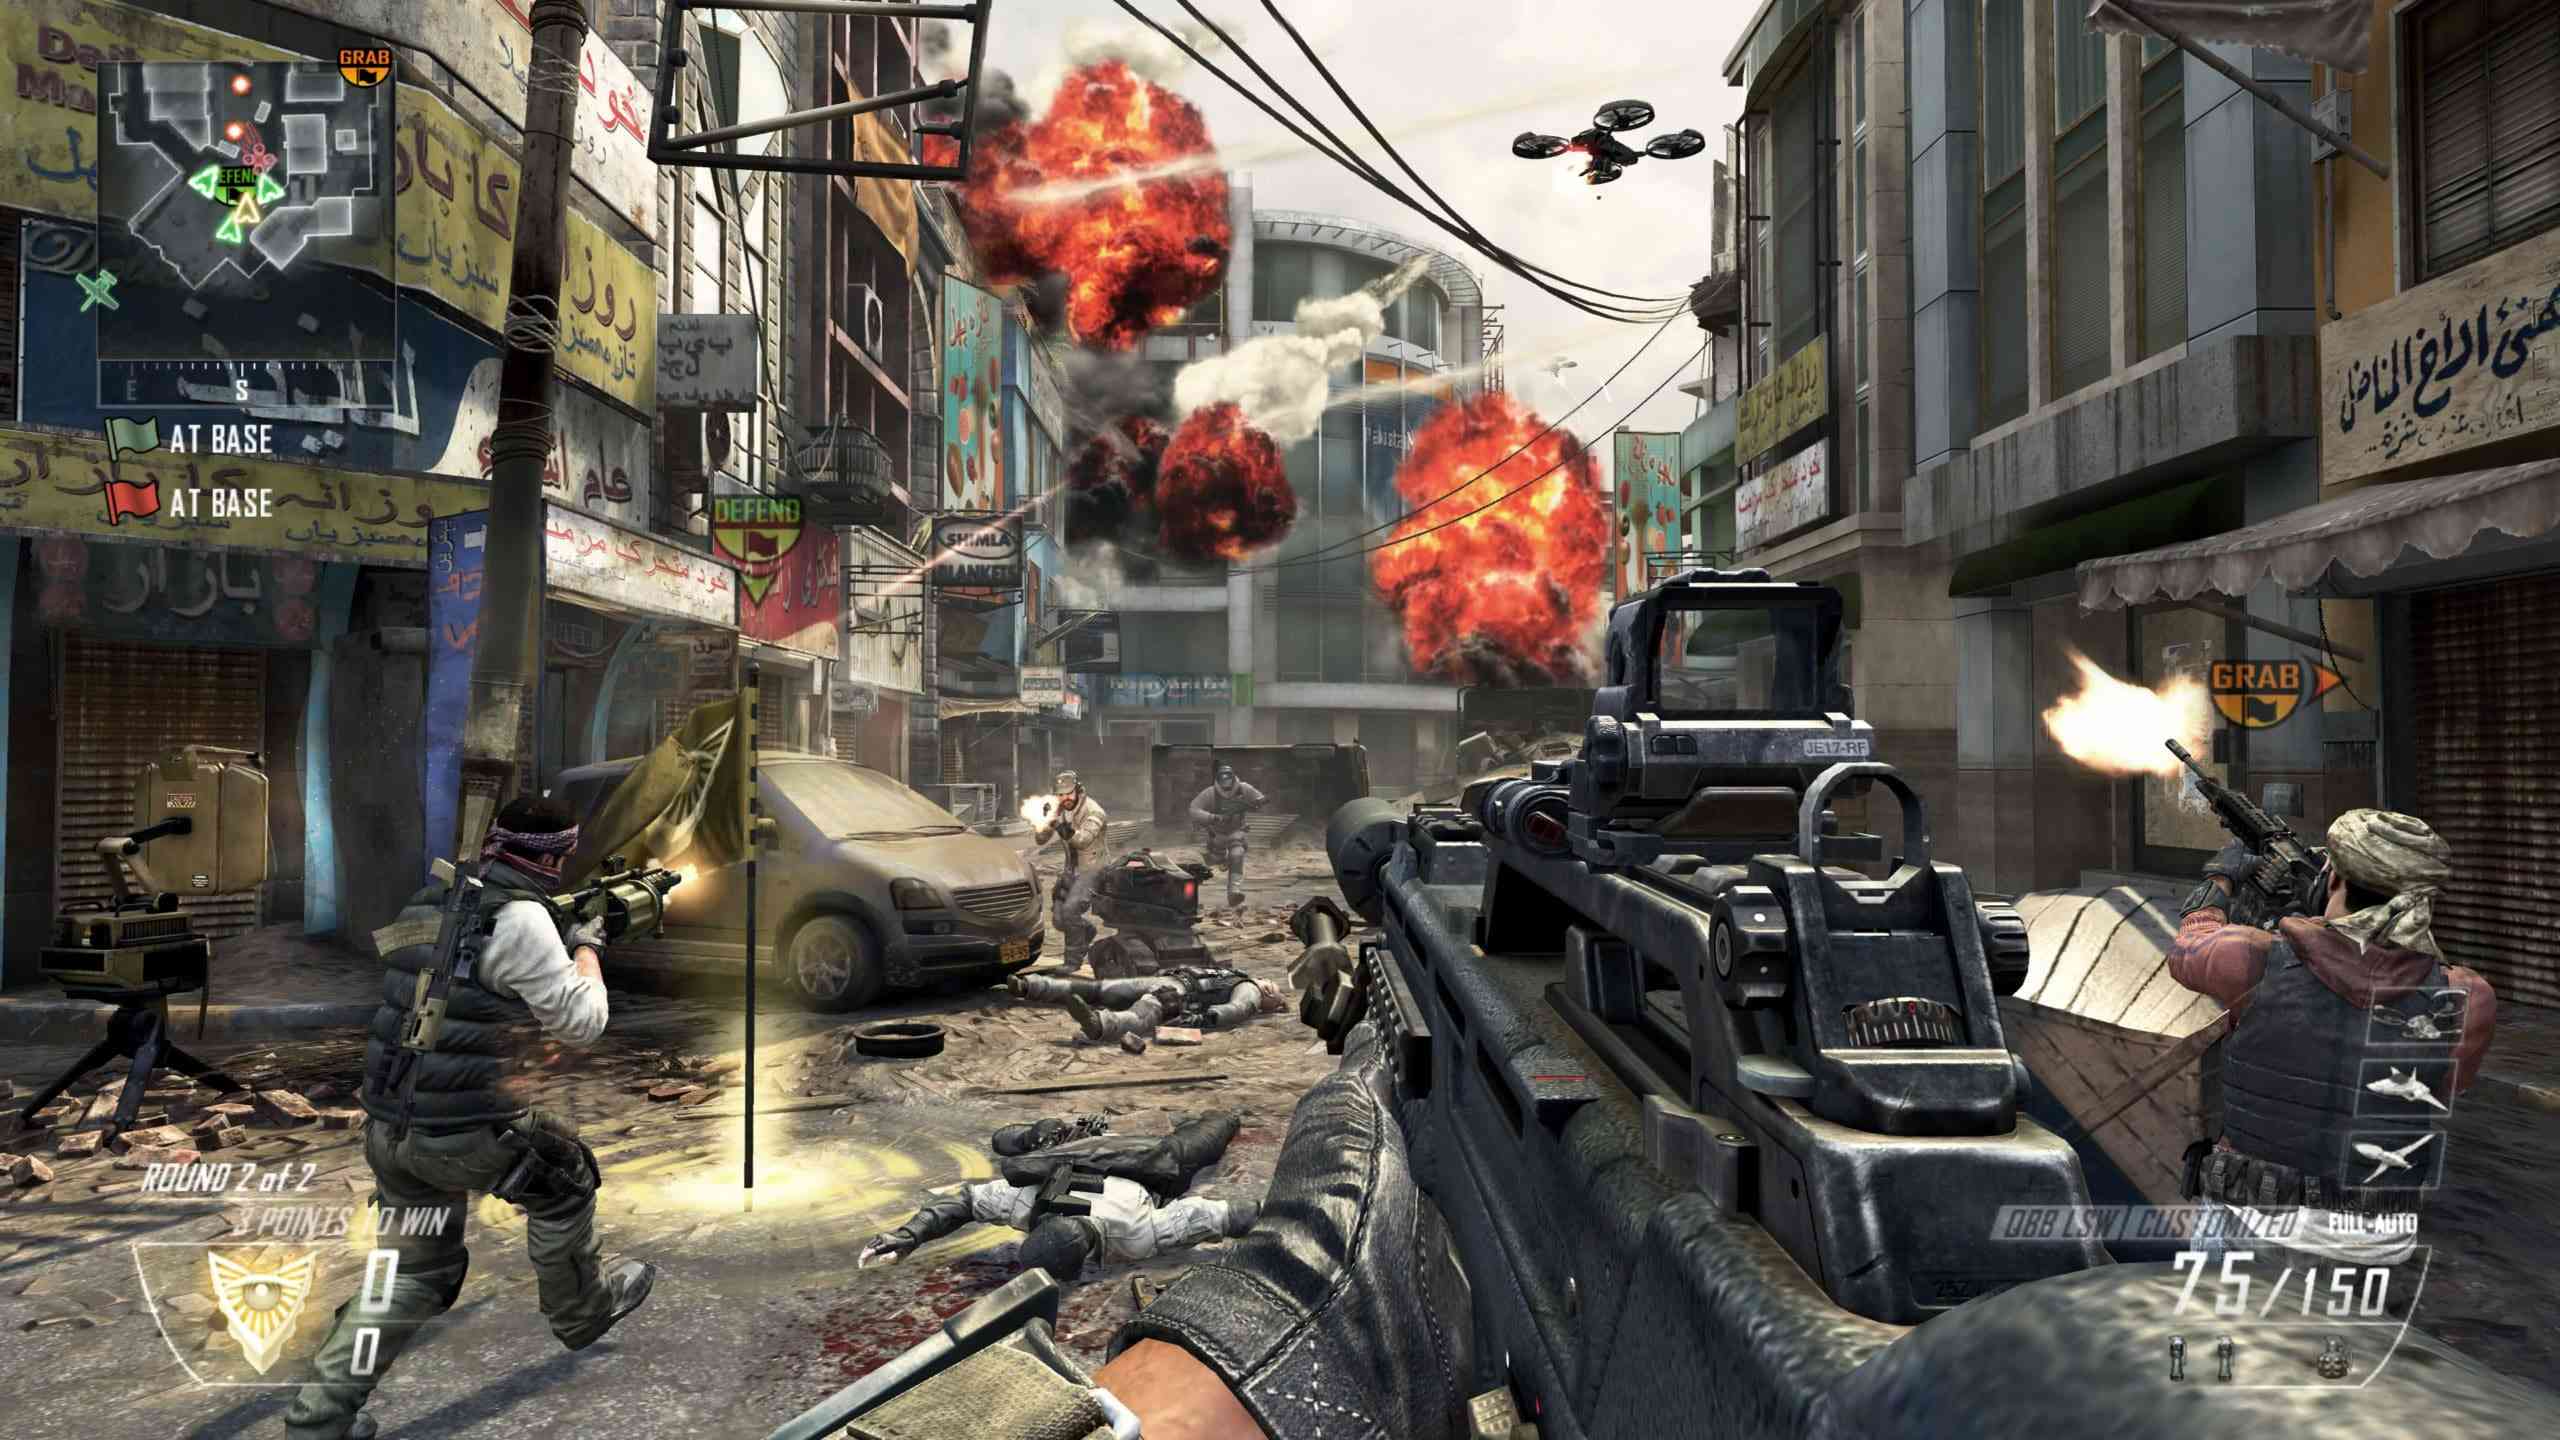 http://cogconnected.com/wp-content/uploads/2012/11/Call-of-Duty-Black-Ops-II_Overflow_Capture-the-Flag.jpg